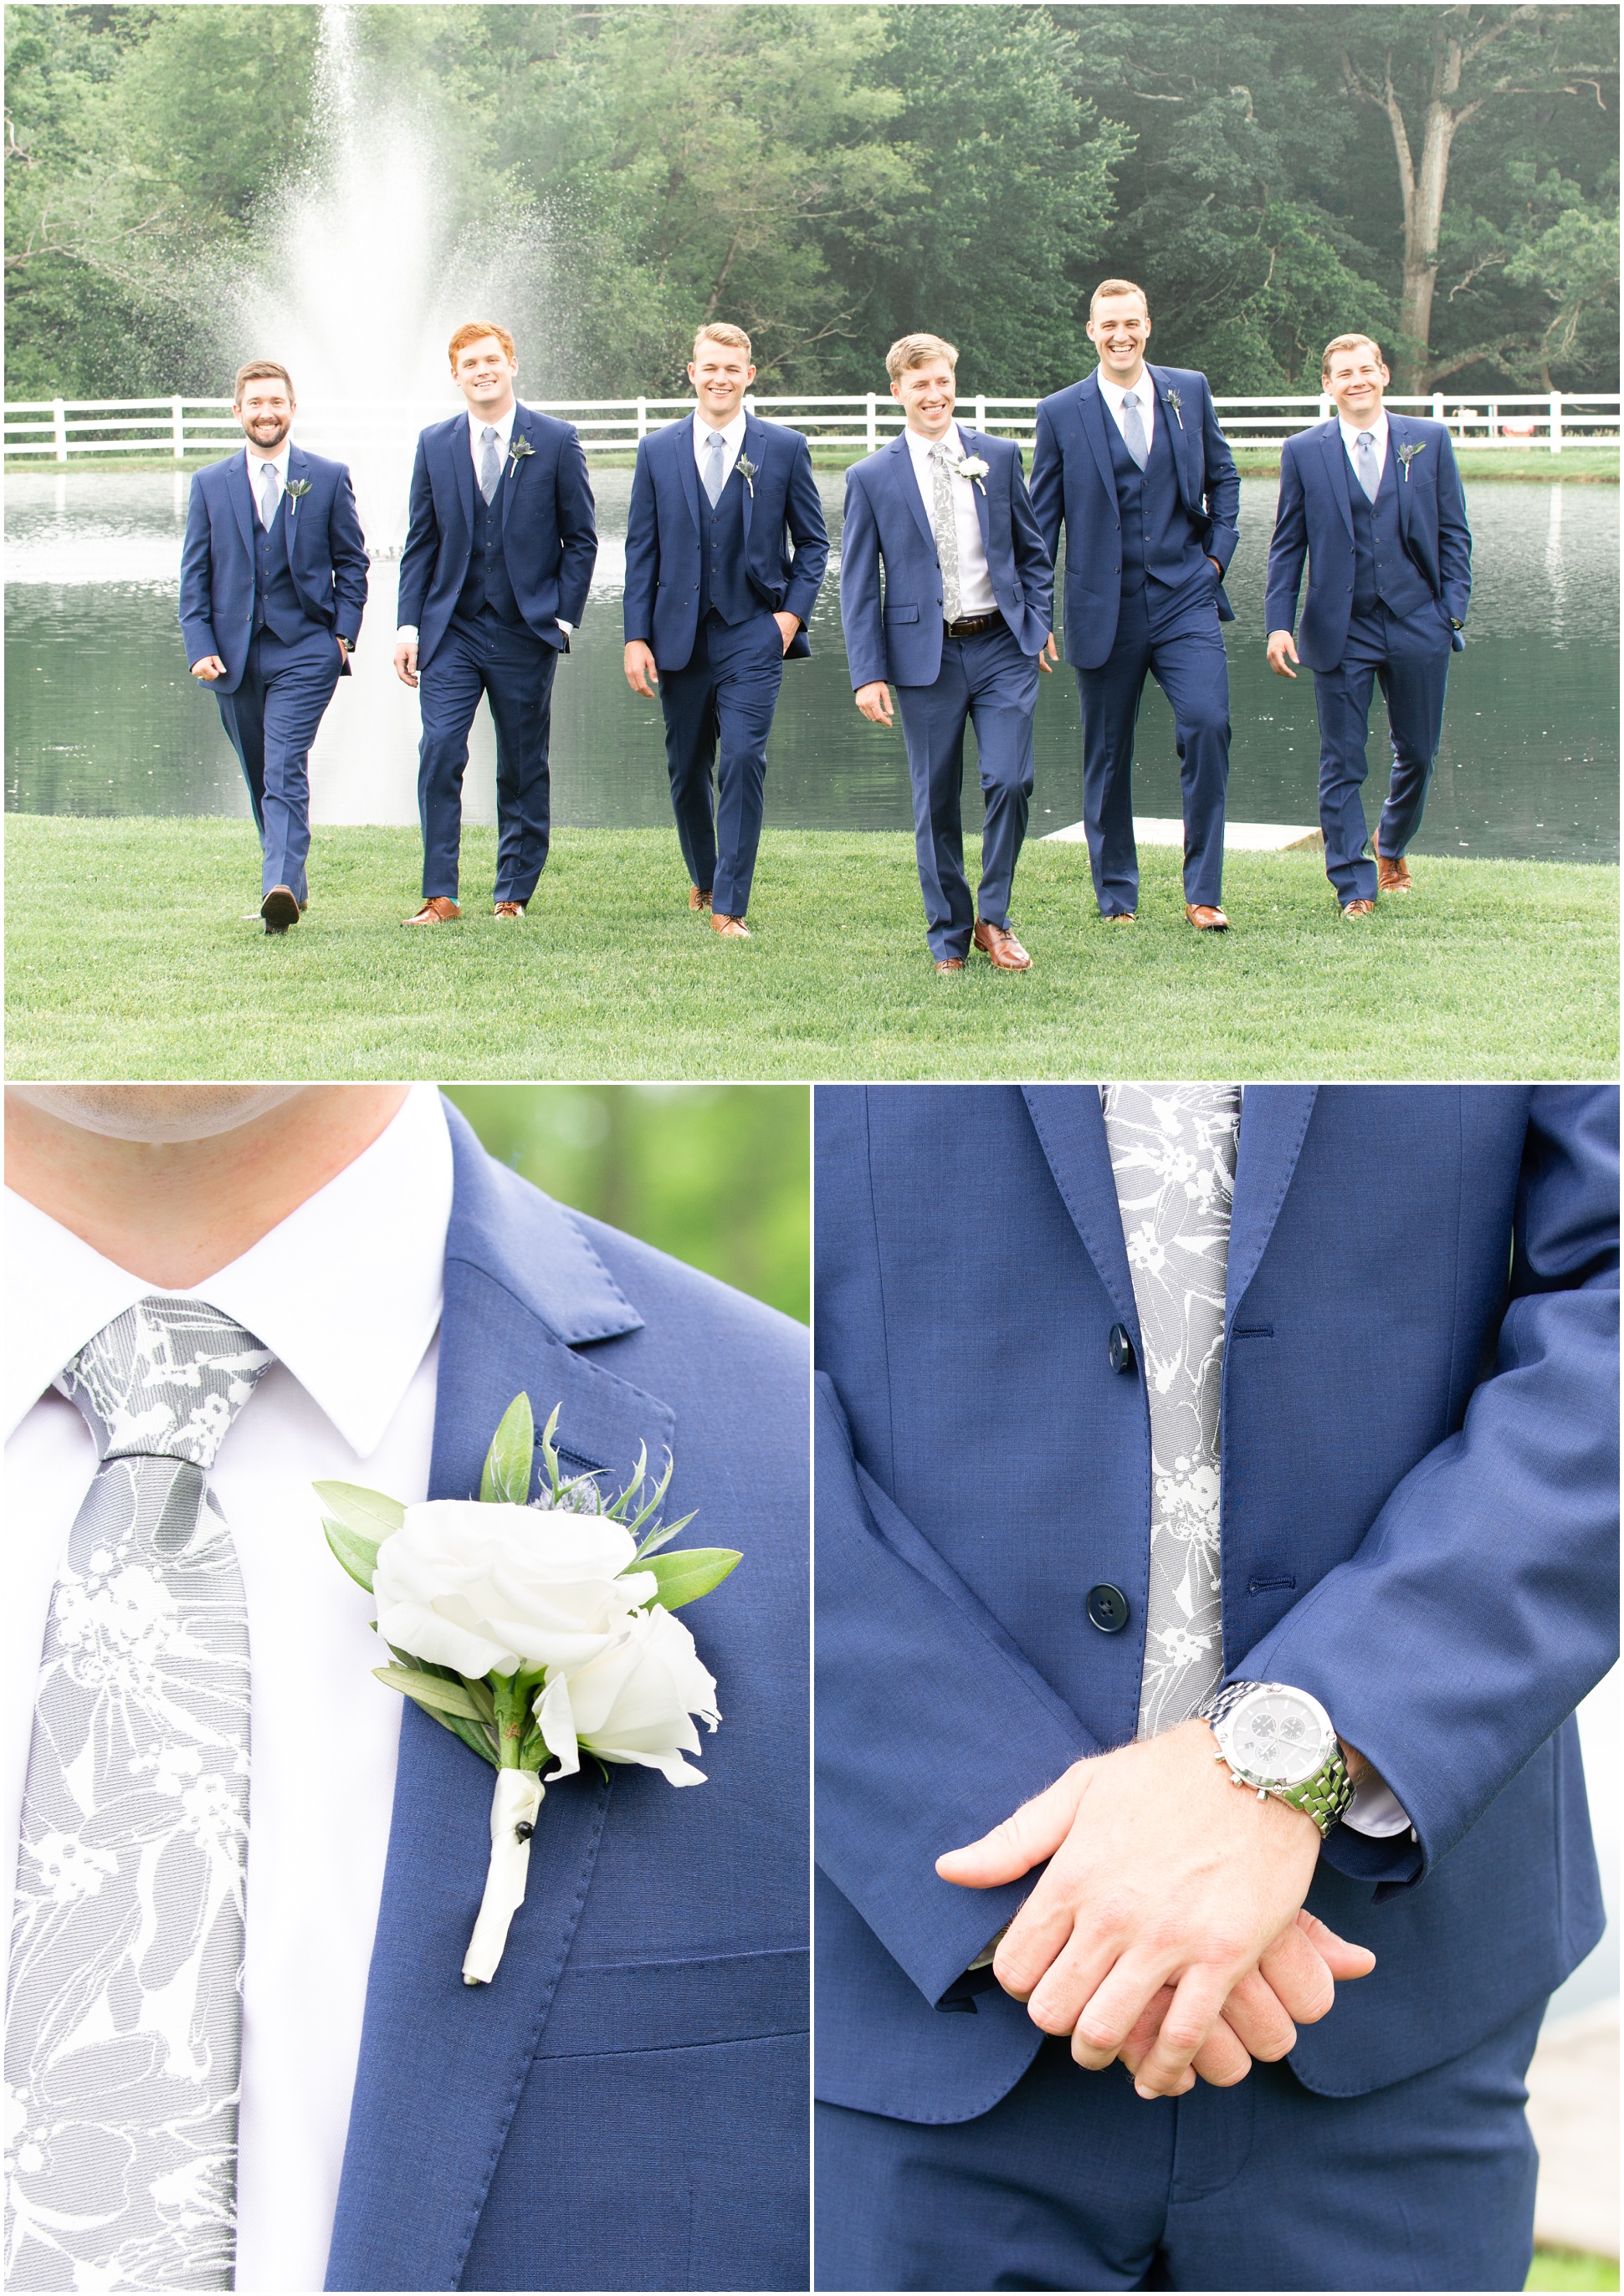 Groom and Groomsmen Photos in front of Pond at Pond View Farms on Wedding Day